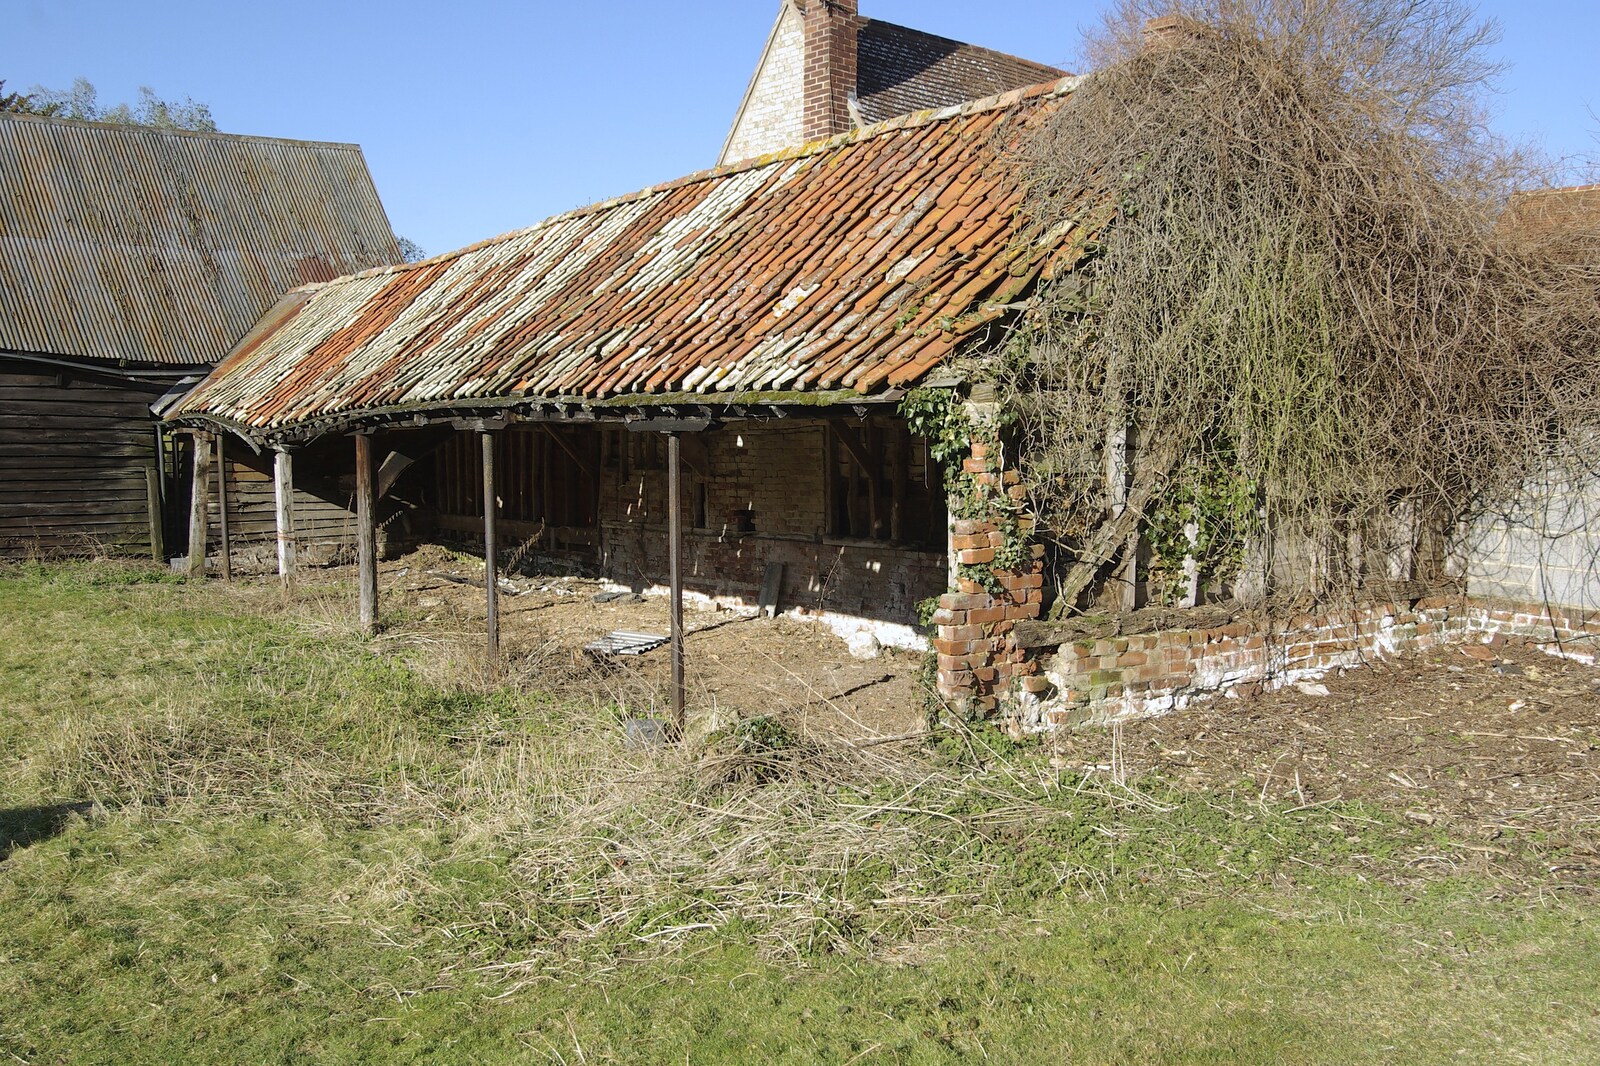 A derelict barn near Liviu's from Aldeburgh, Sprogs, and The BBs at Stoke by Nayland, Suffolk - 10th February 2008